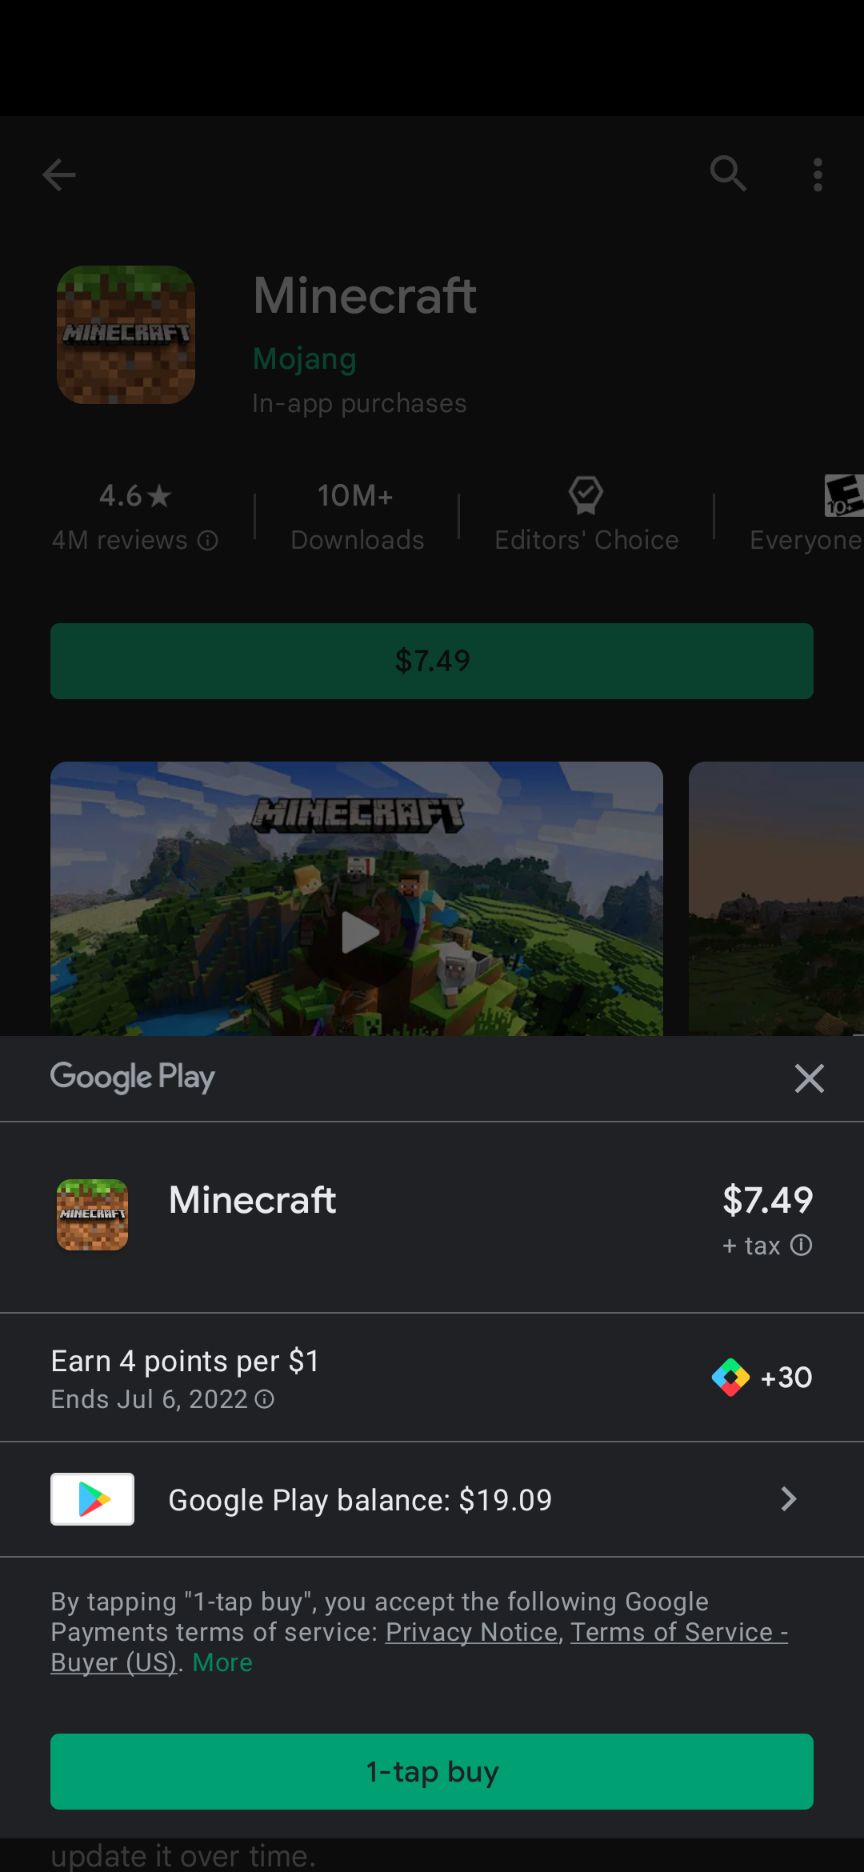 The Google Play Store app's purchase page for Minecraft.